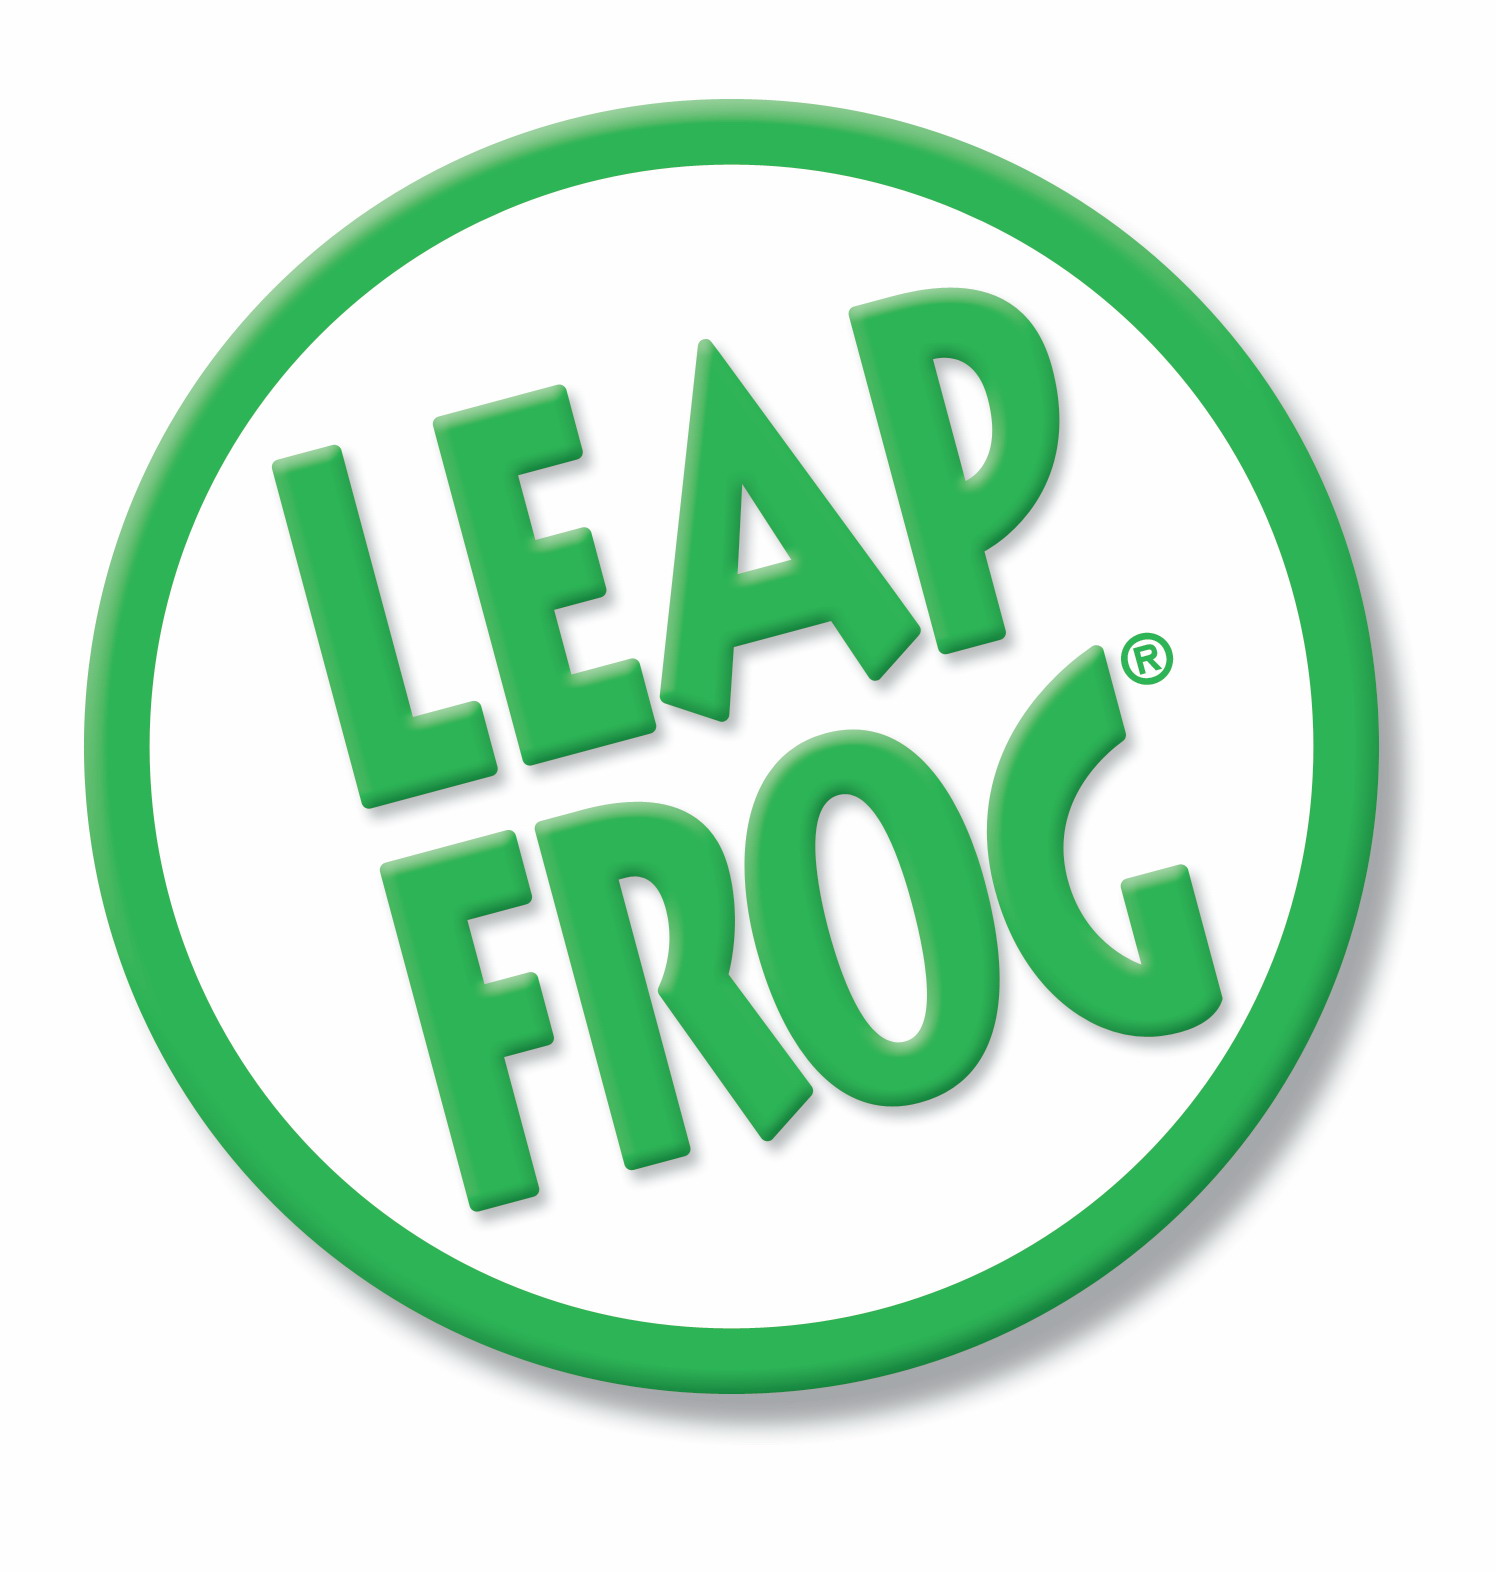 LEAPFROG HOUSE PARTY Featuring Tag Reader and LeapPad